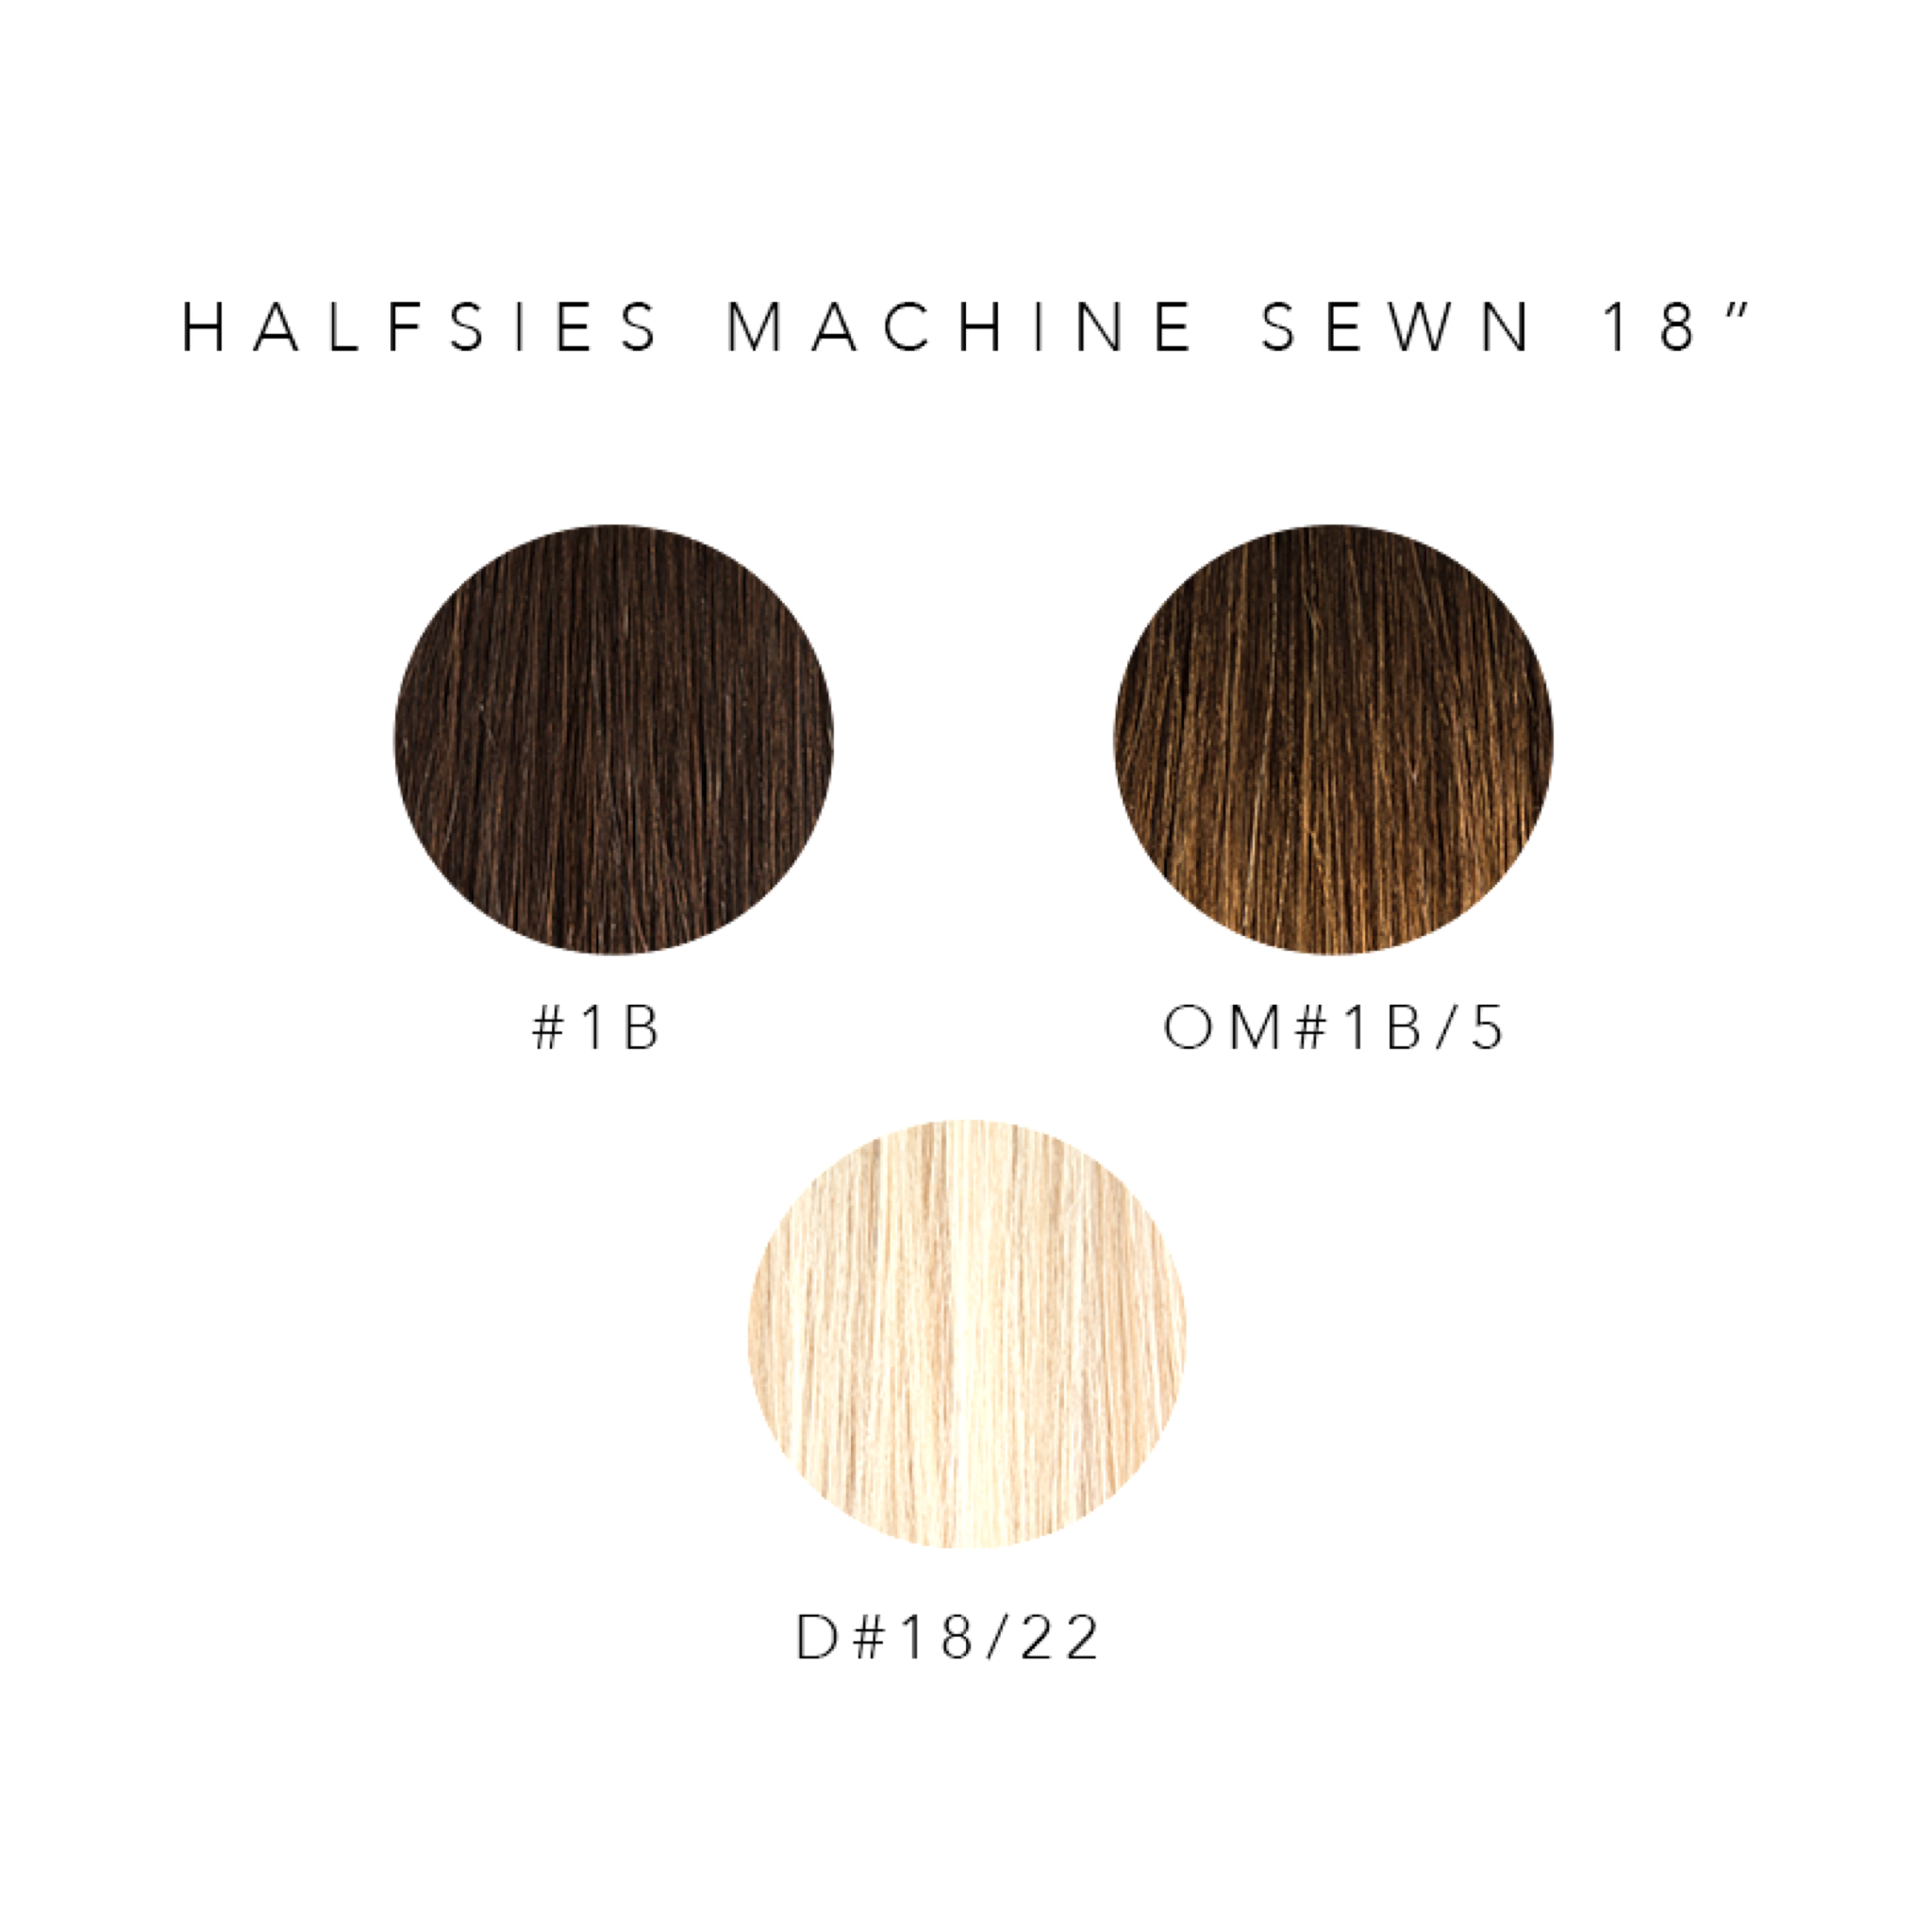 Back In Stock: Laced Hair Wefts!